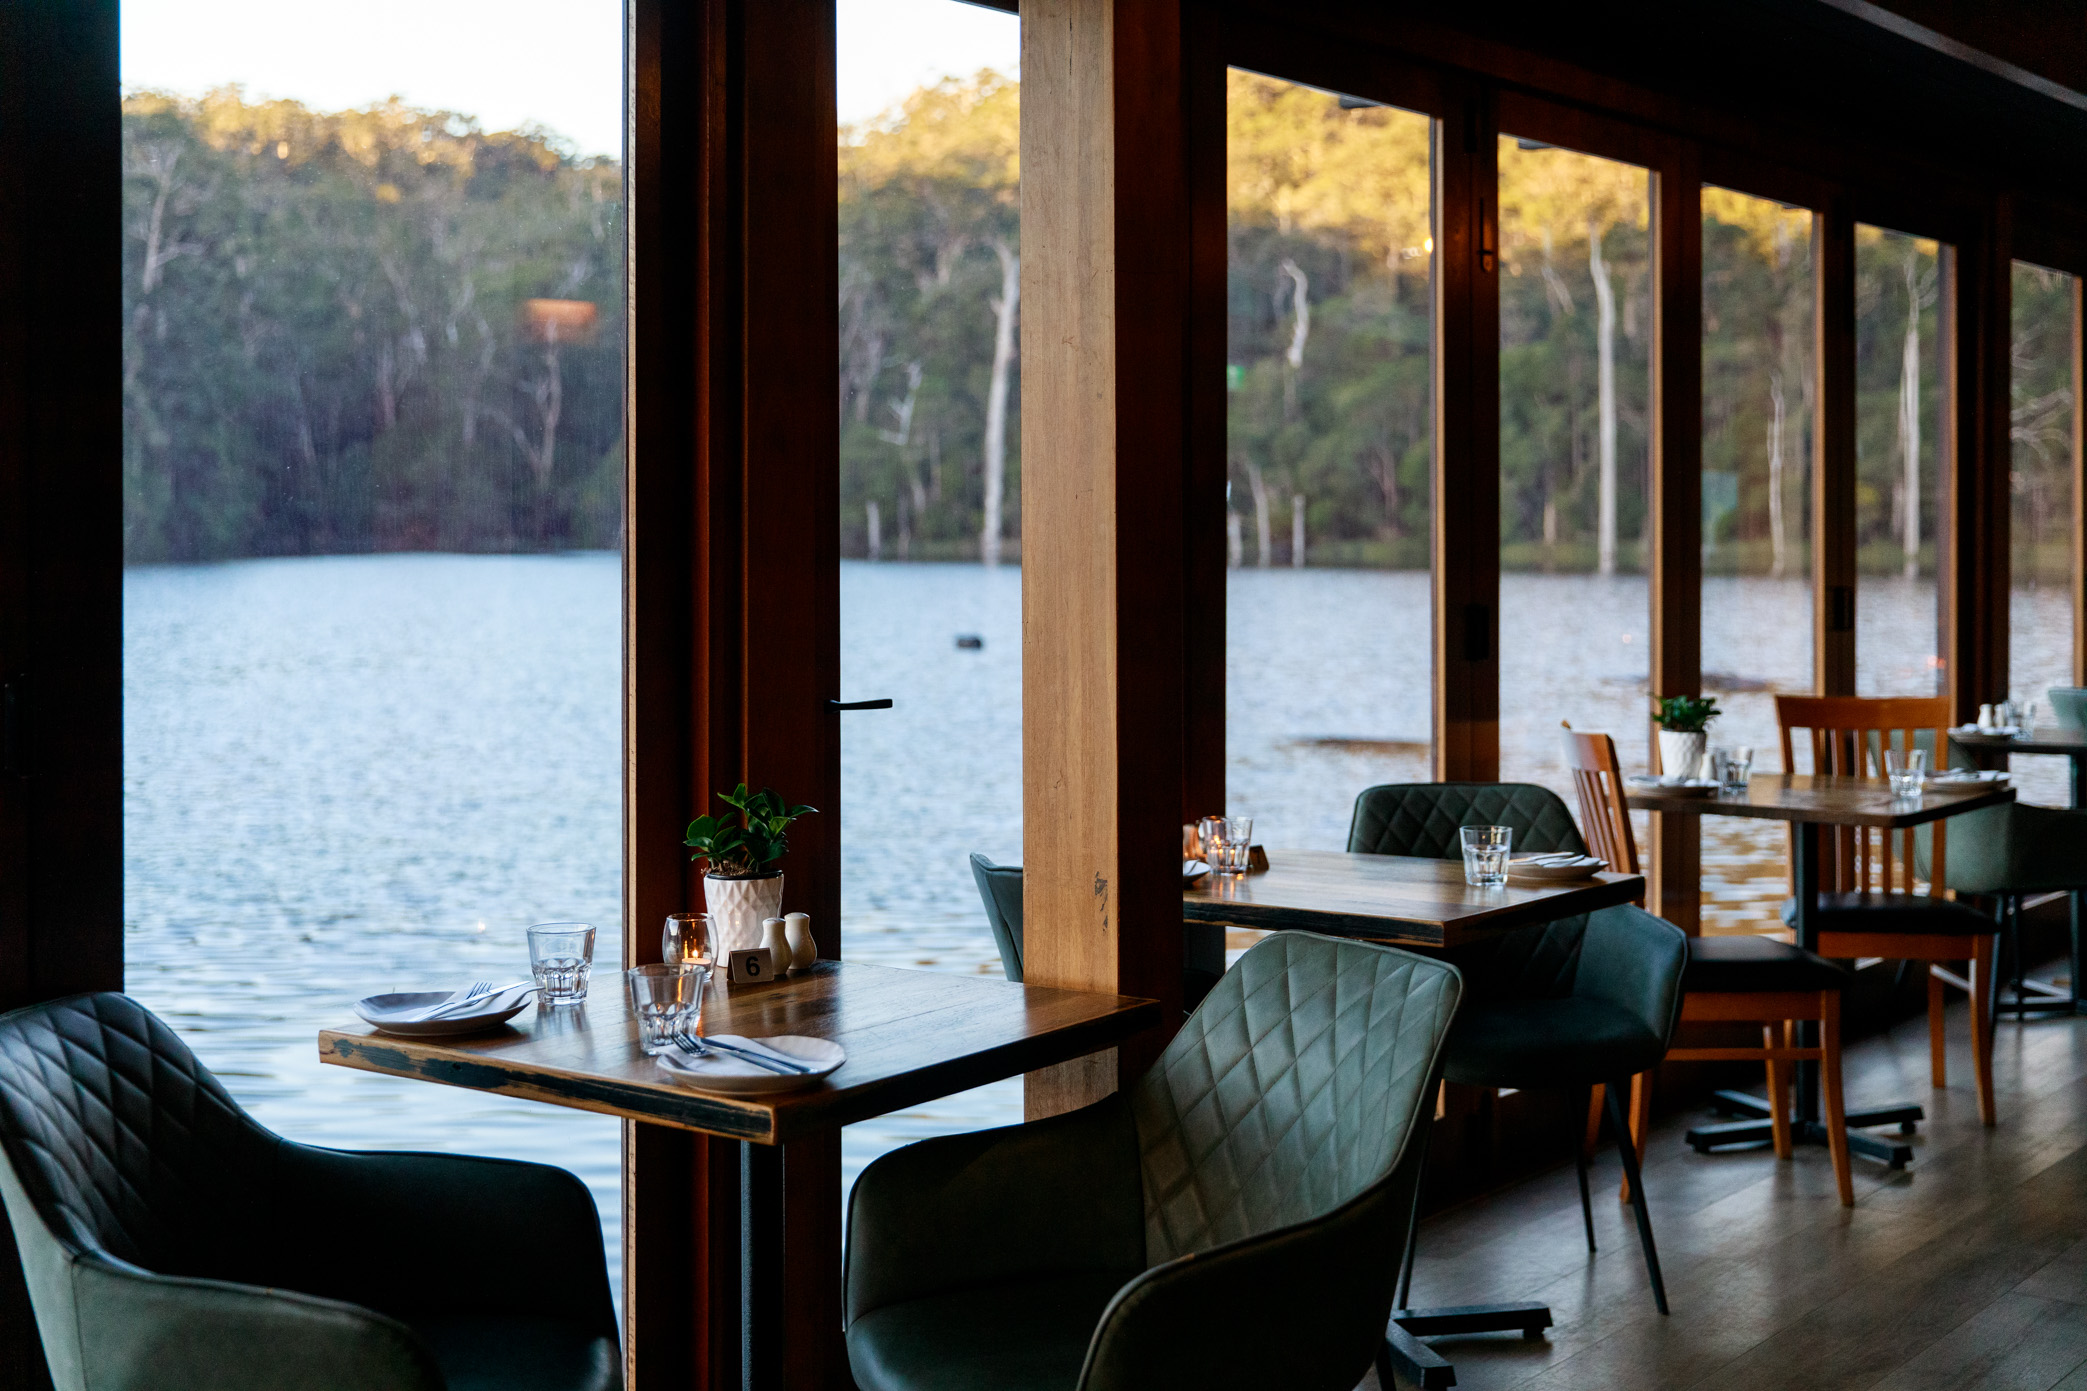 Interior Lakeside Restaurant, empty chairs and table overlooking Lake Beedlup in daytime.